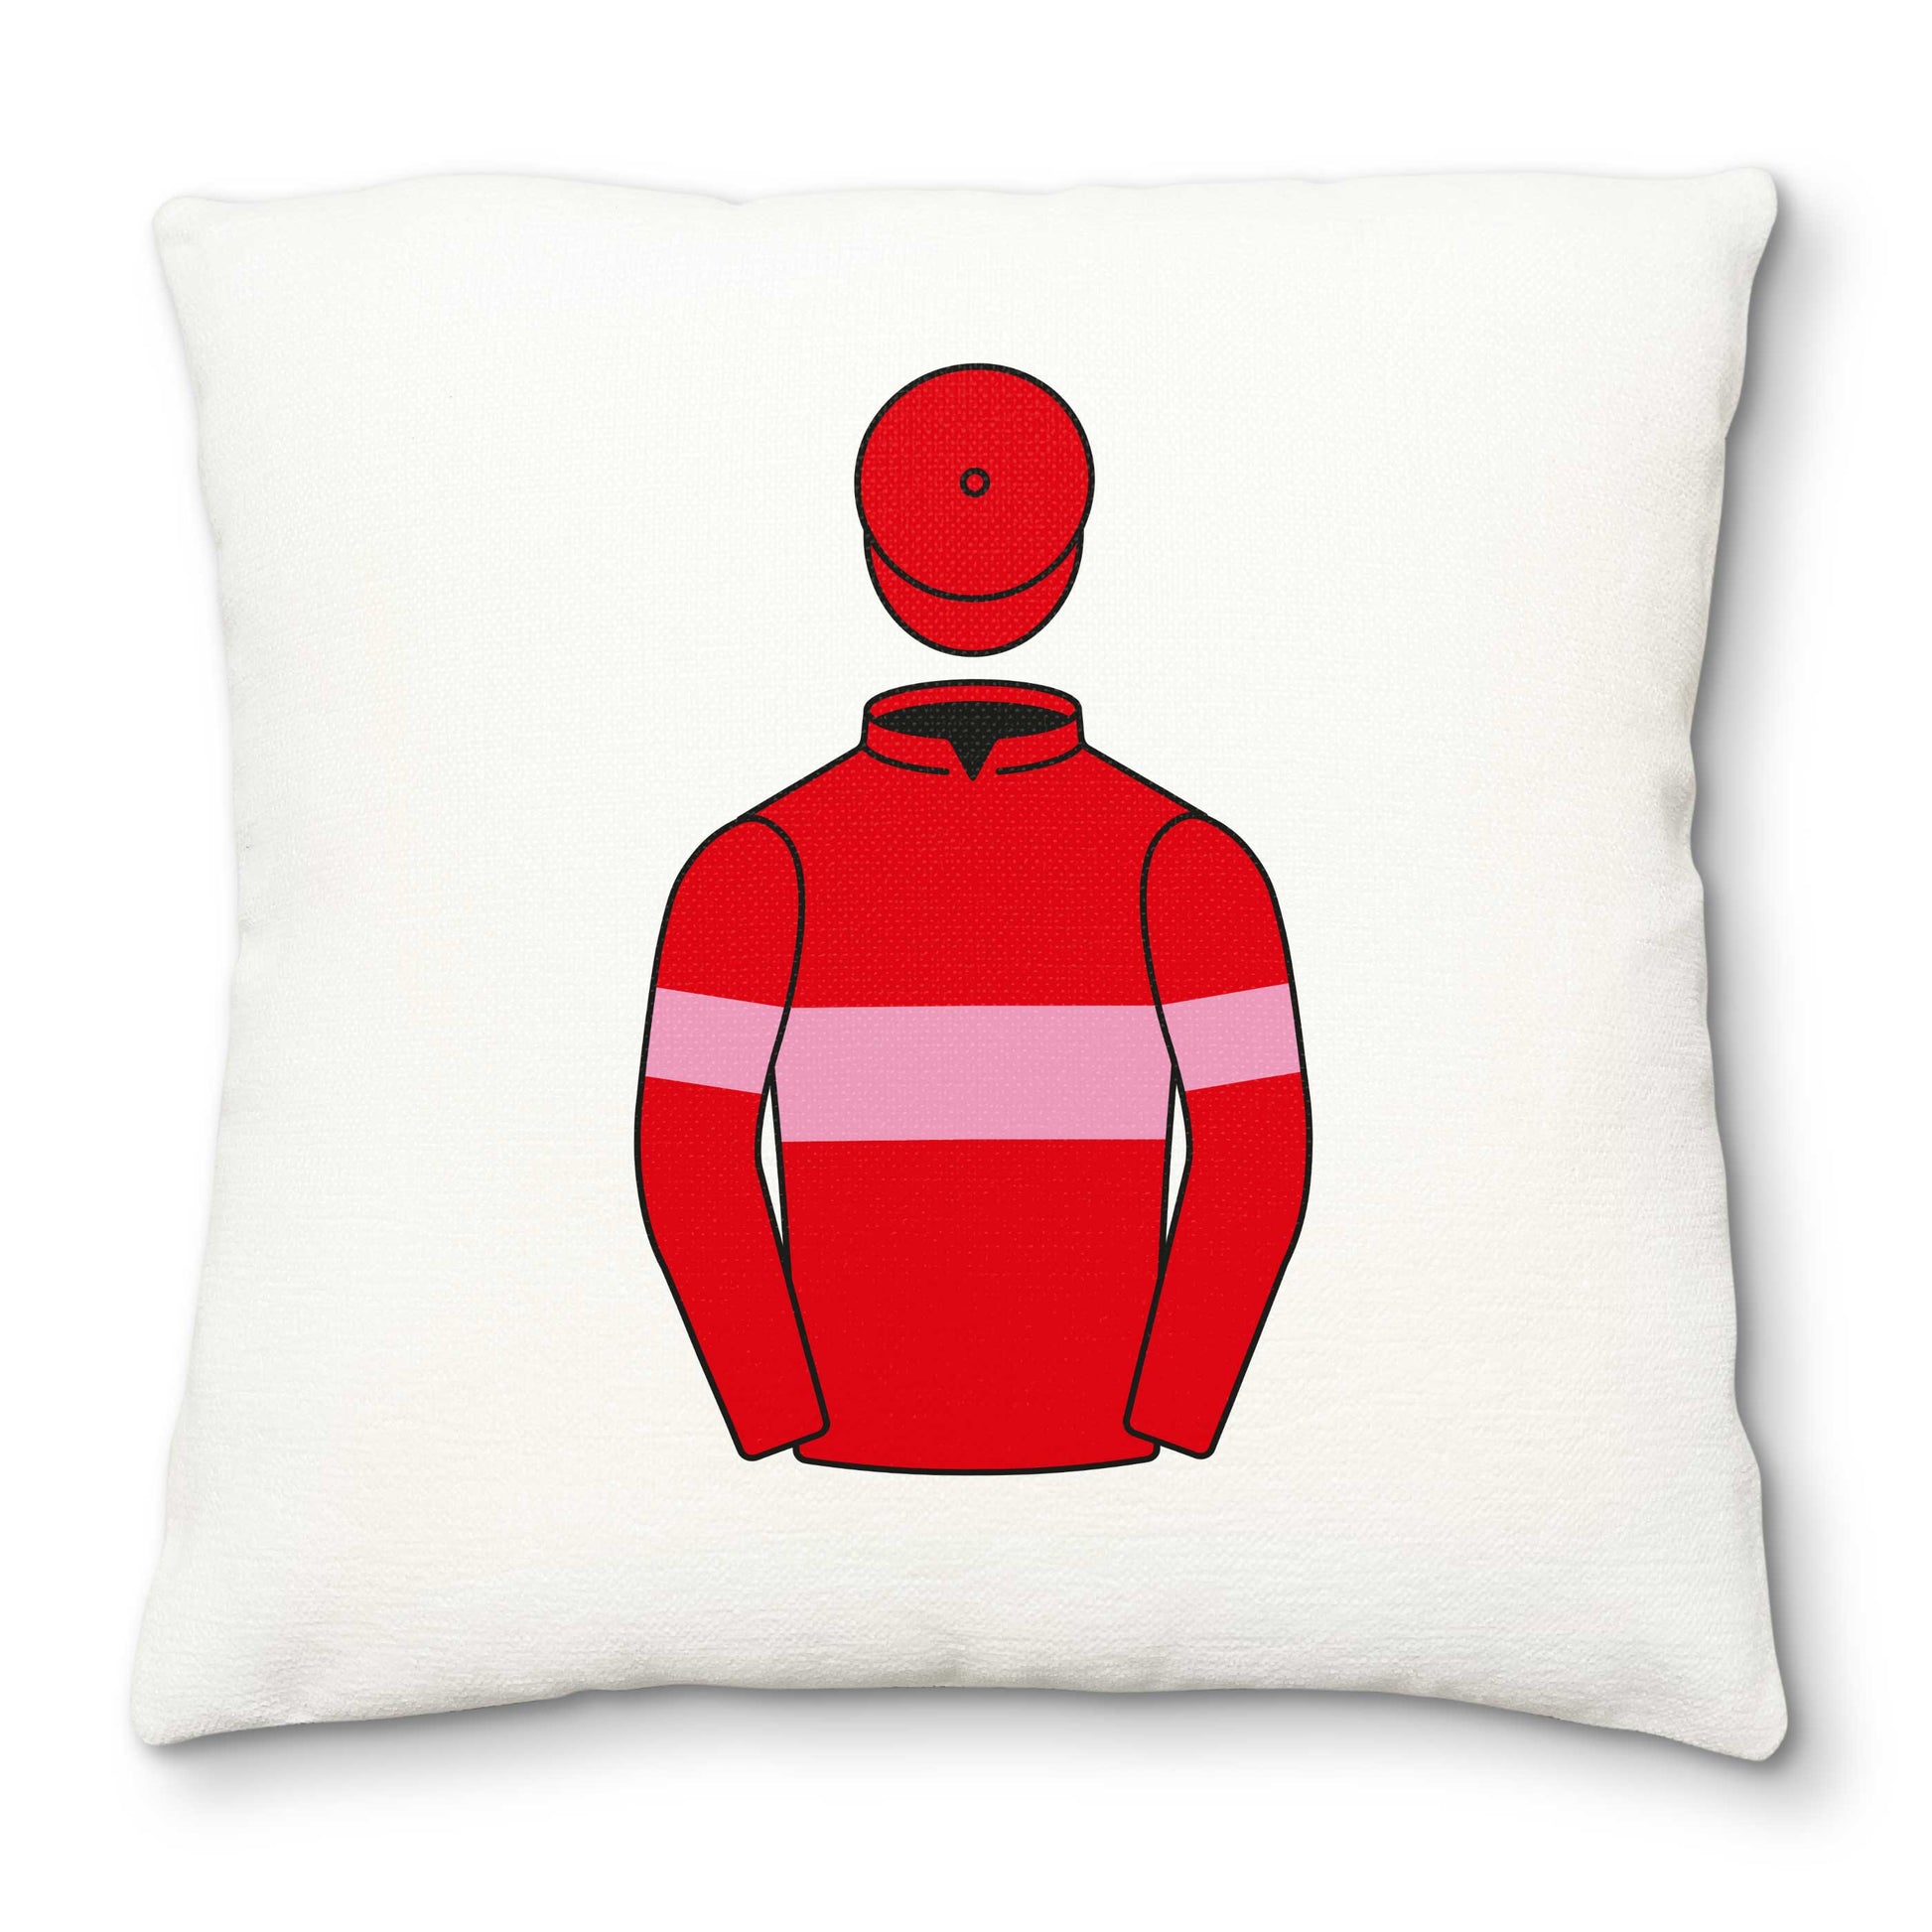 Sullivan Bloodstock Limited Deluxe Cushion Cover - Hacked Up